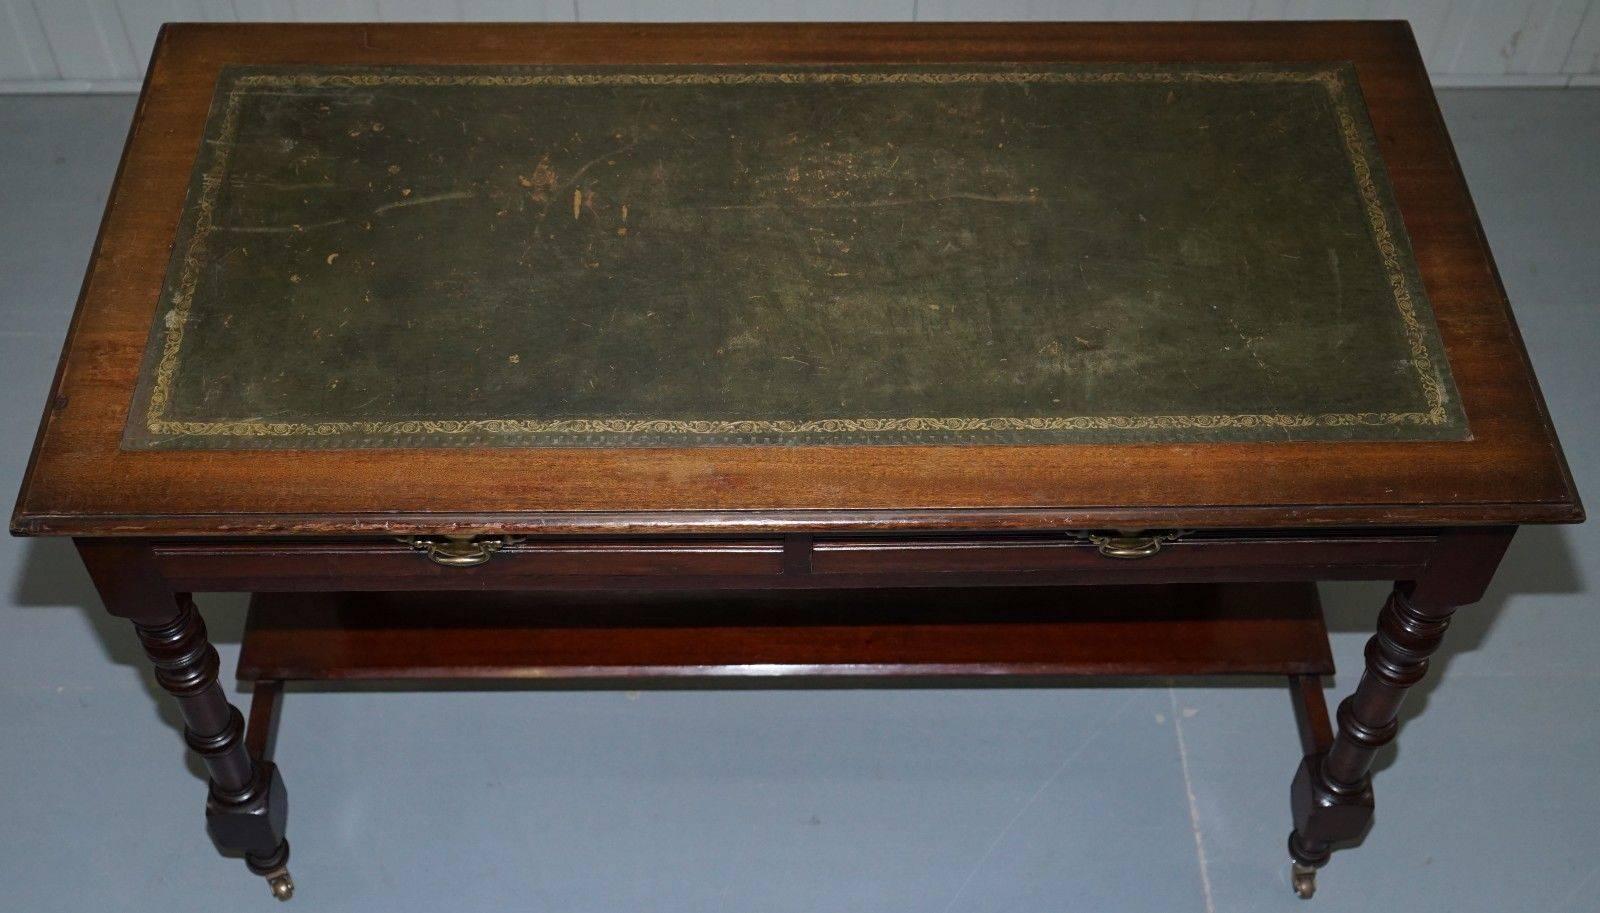 British Victorian Mahogany with Leather Writing Surface Desk Writing Table Lovely Piece